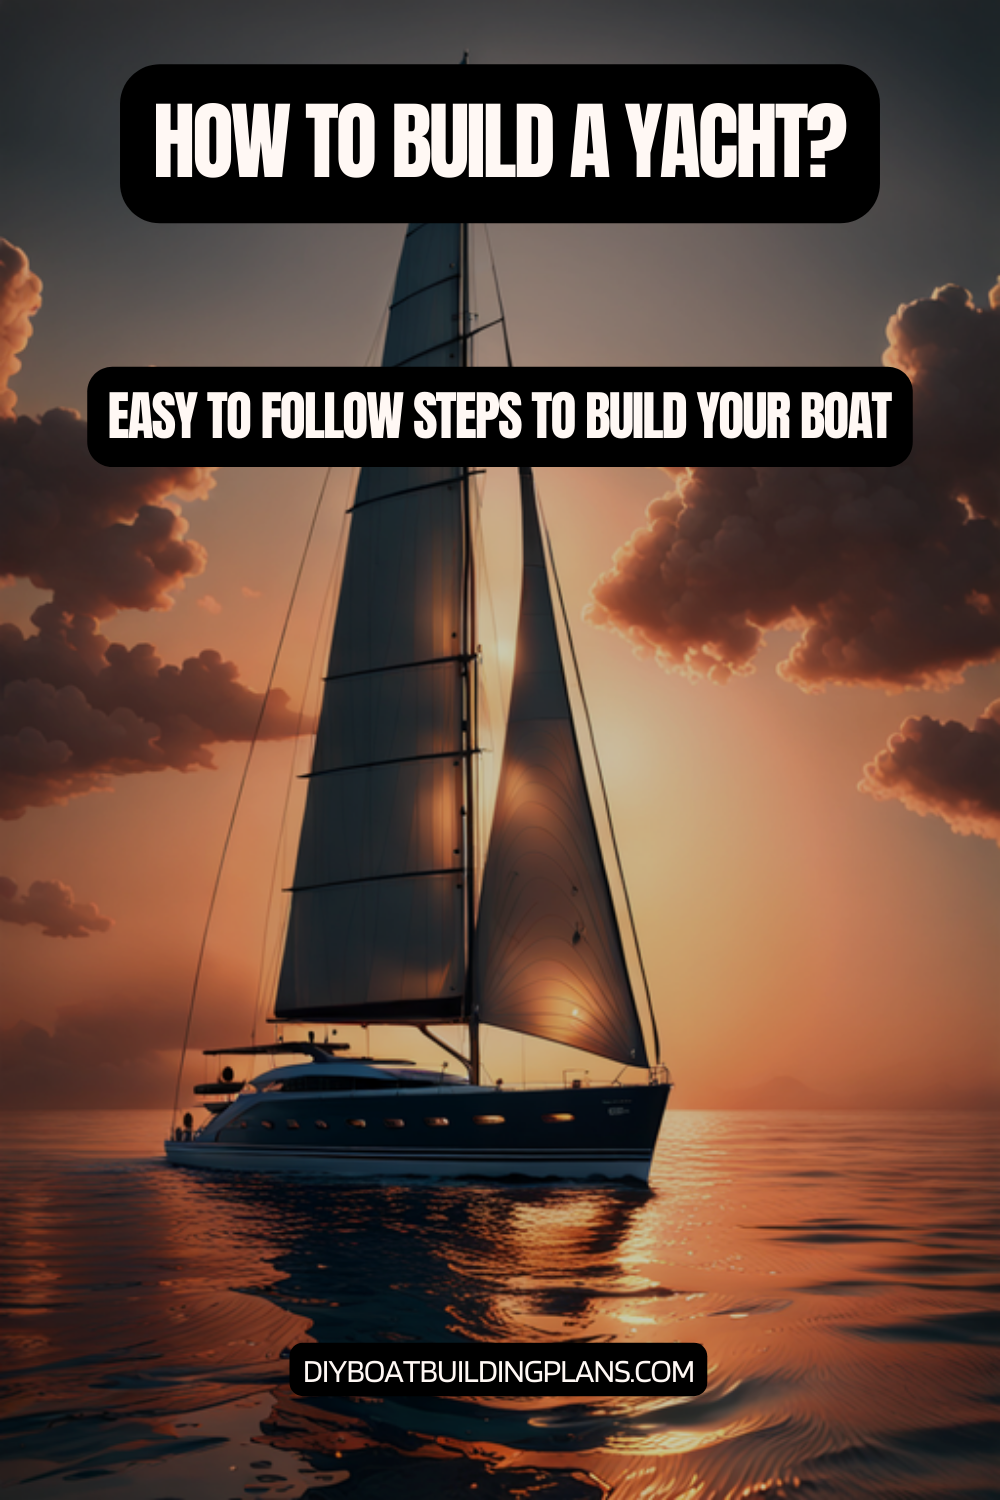 How To Build a Yacht